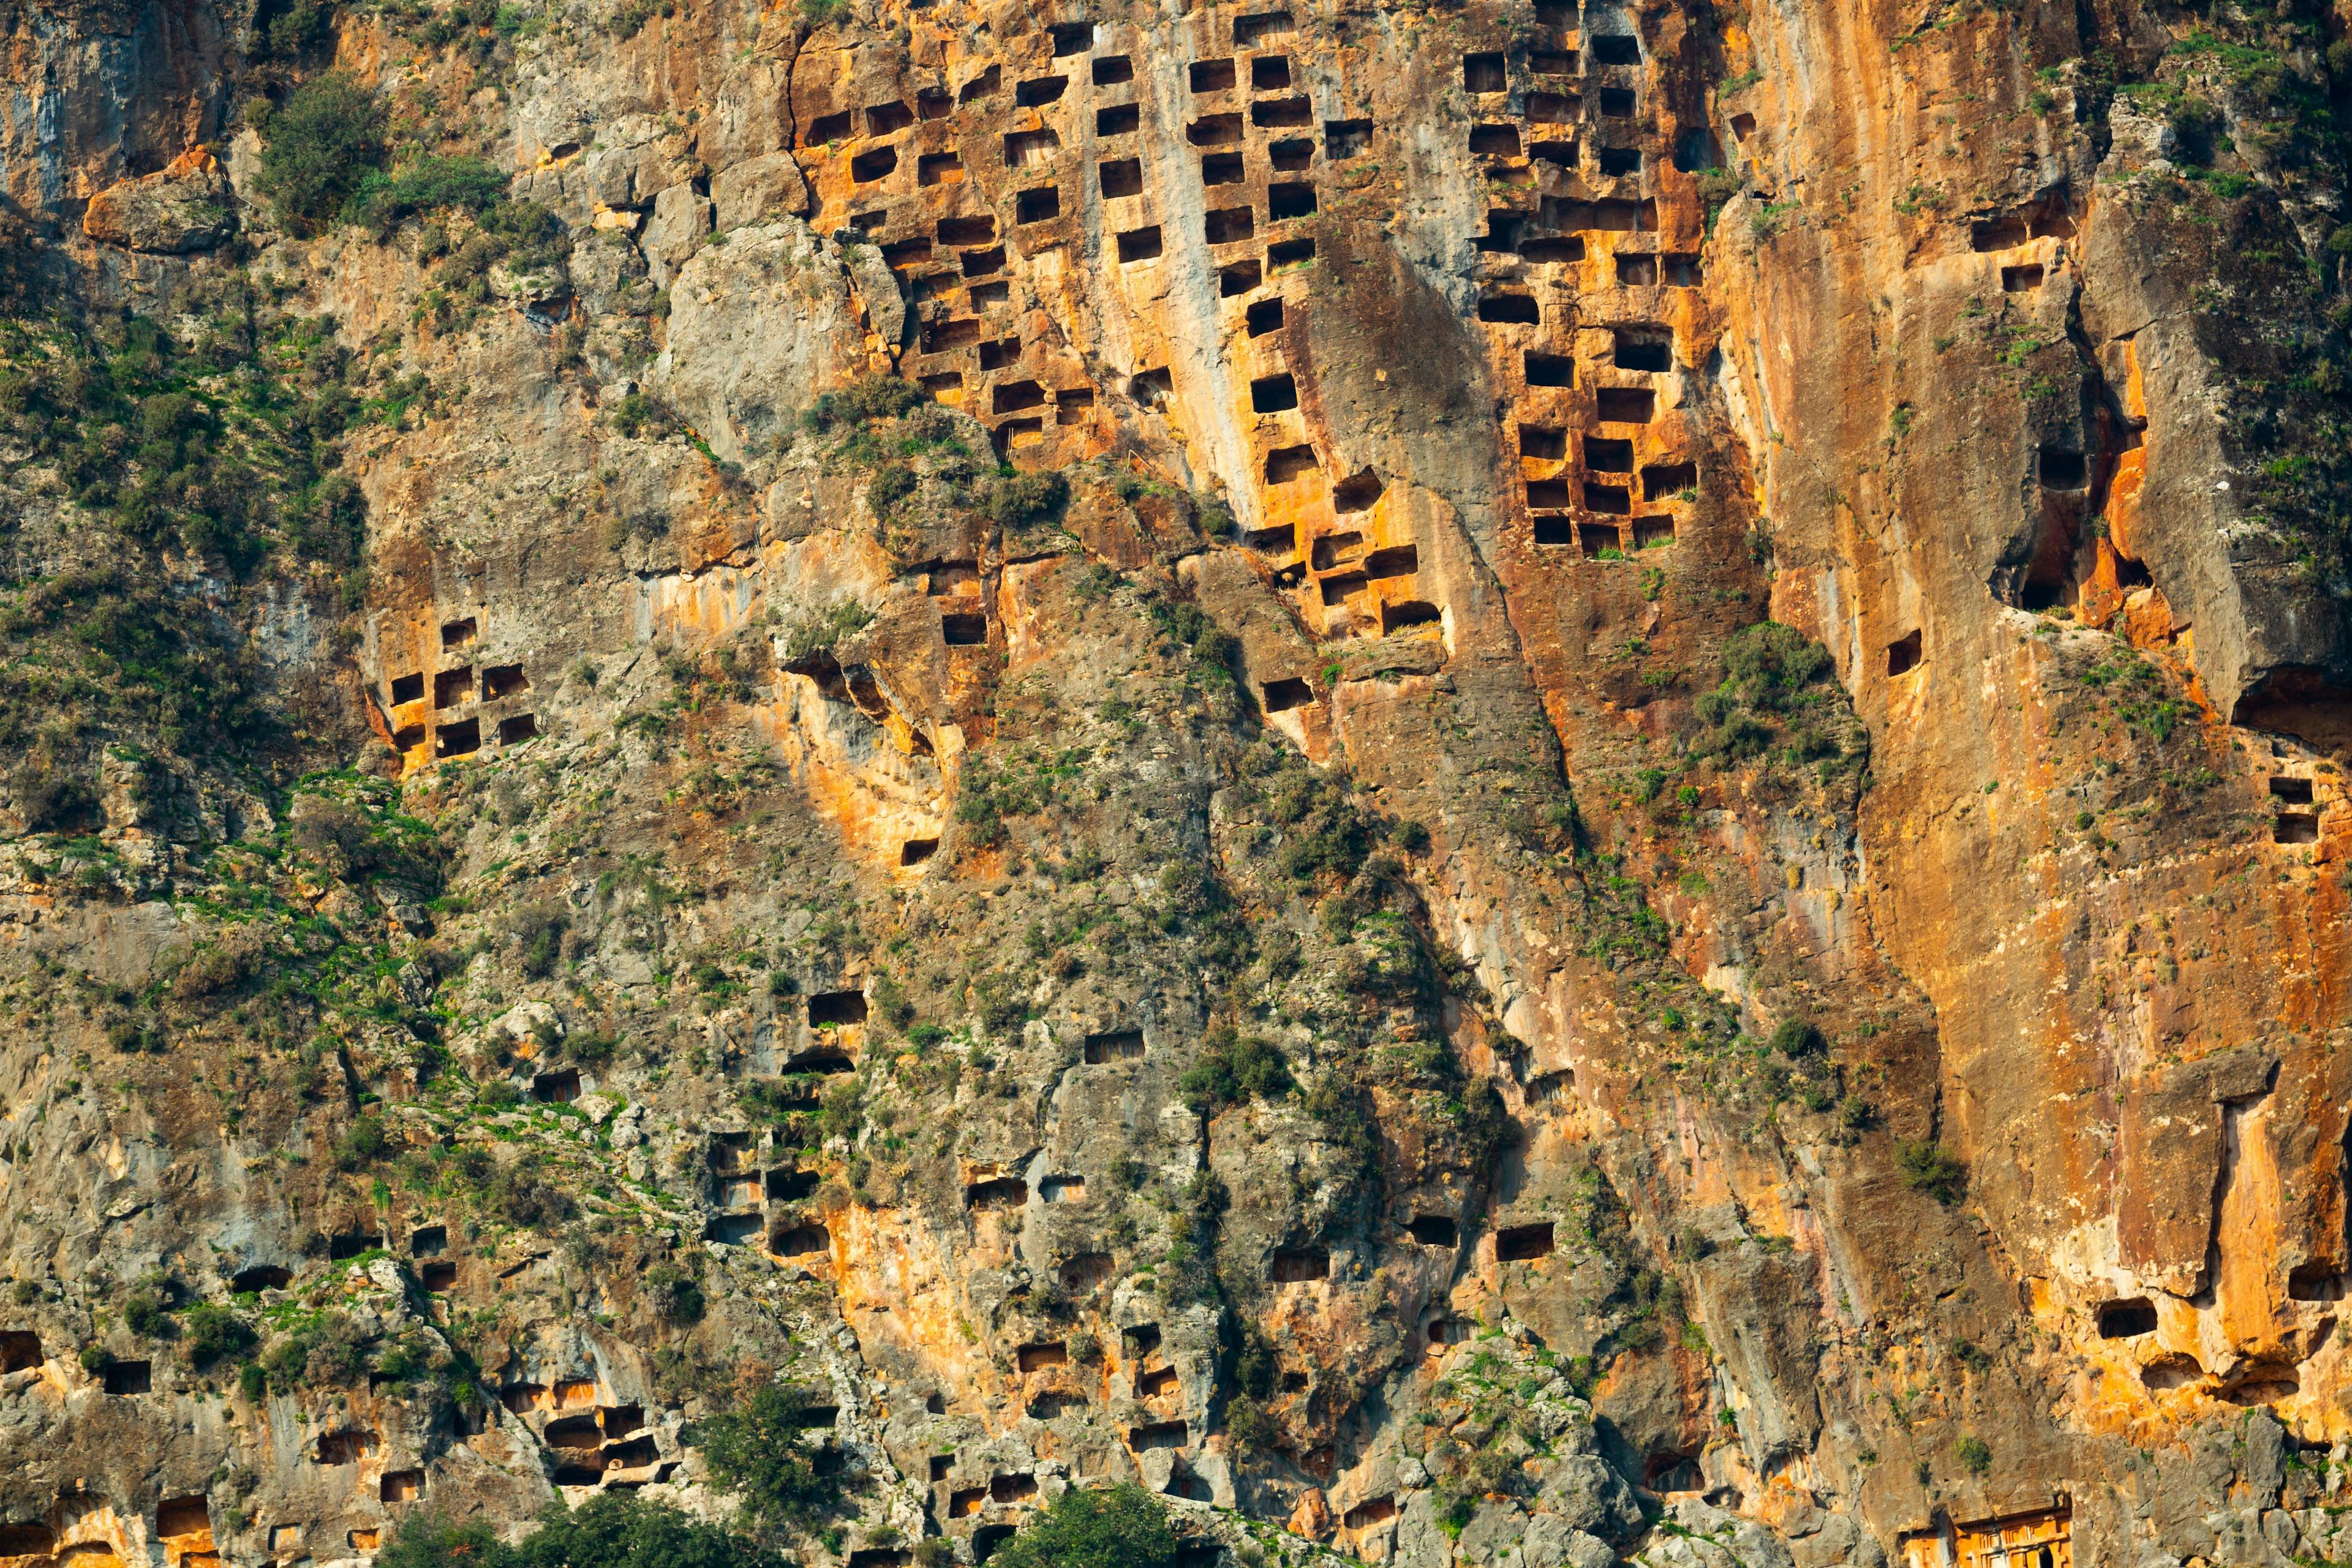 The unique tombs carved into the cliff called the Pinara Honeycomb tombs.